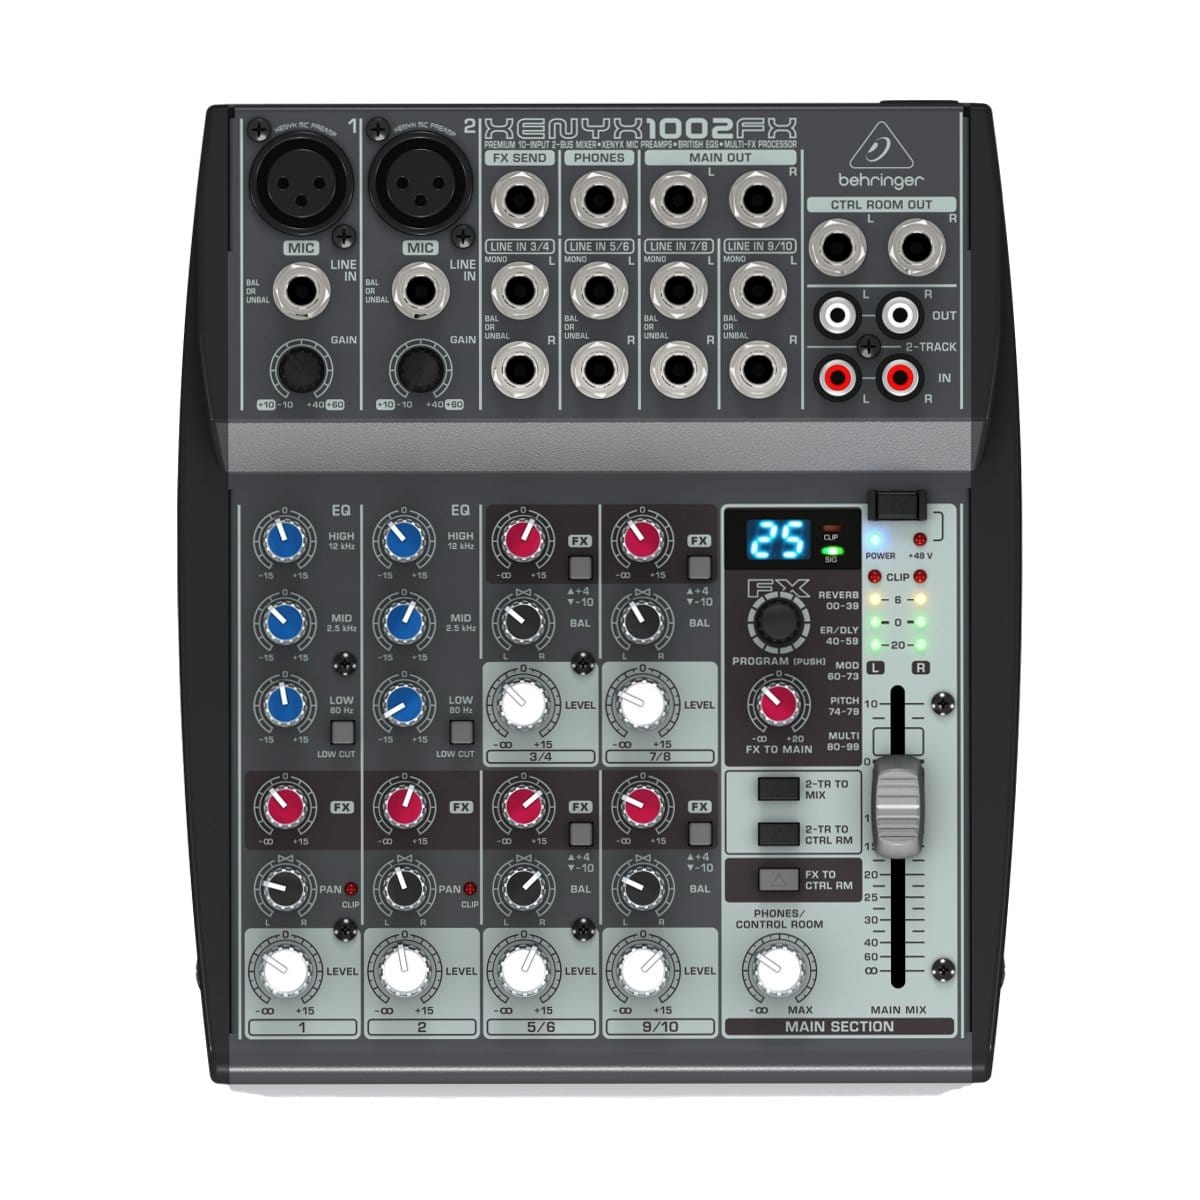 Behringer PA | Lighting Behringer XENYX Mixer 10-Input with Effects 1002FX - Byron Music